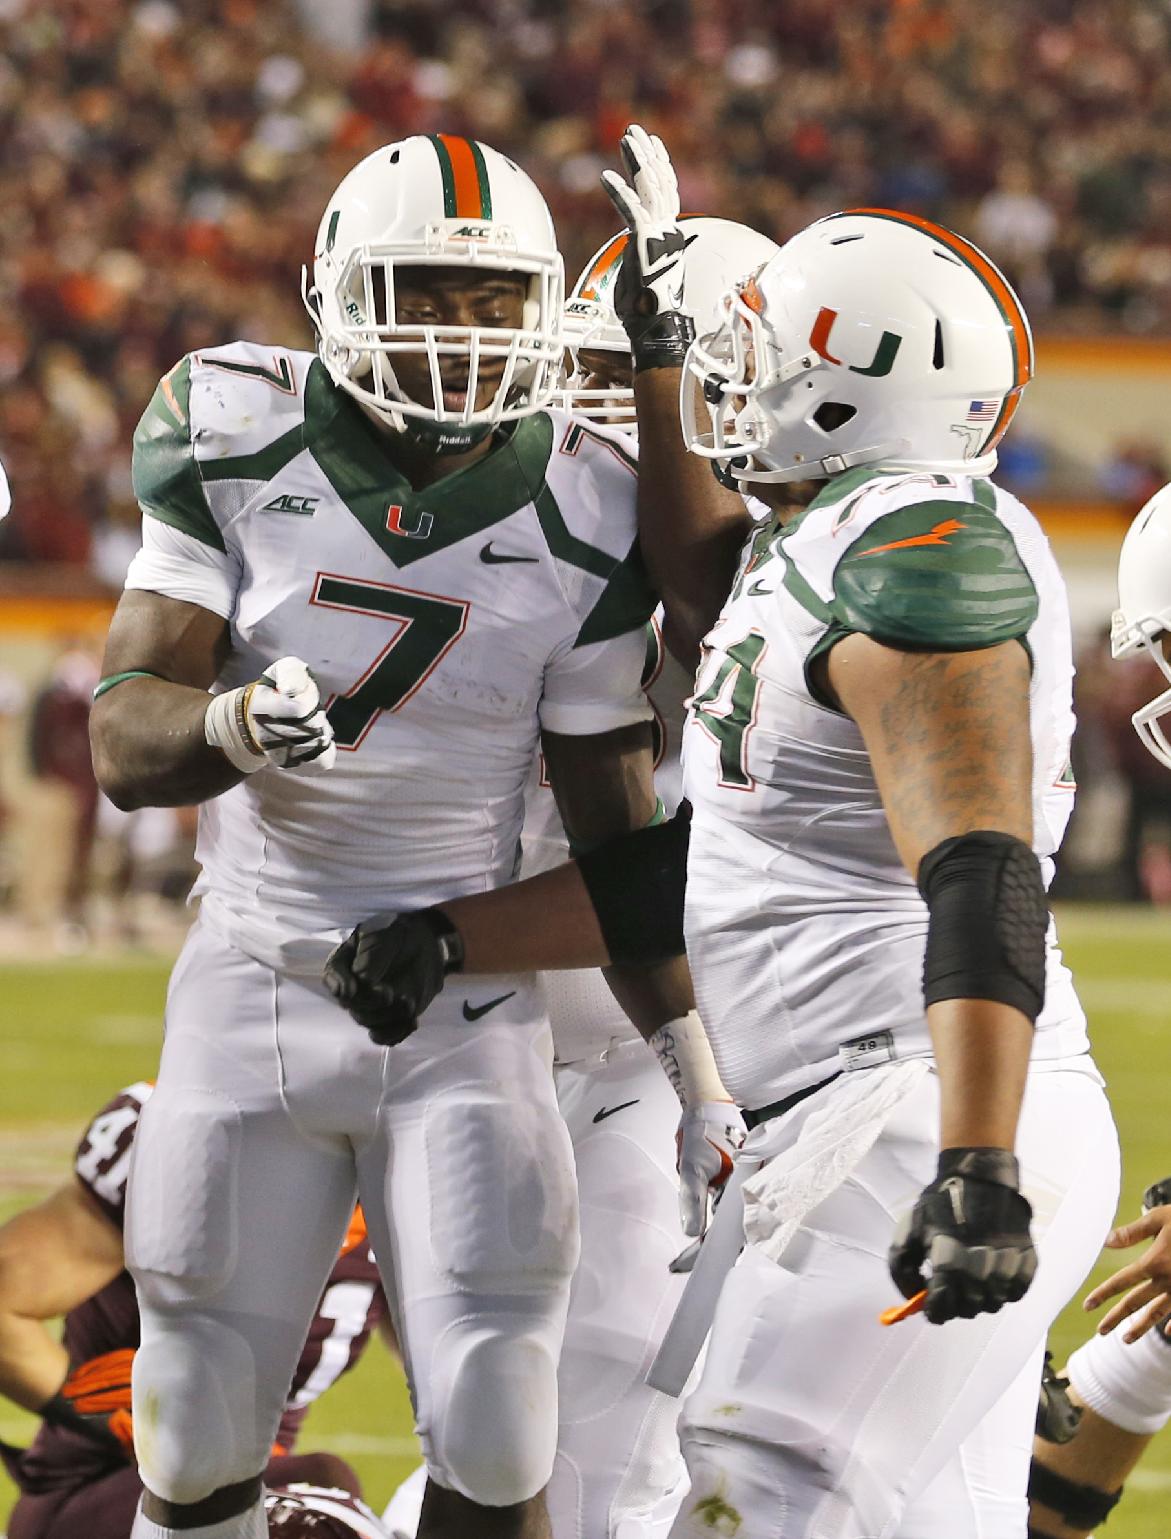 Miami running back Gus Edwards (7) celebrates a touchdown with offensive lineman Ereck Flowers, right, during the first half against Virginia Tech. (AP Photo/Steve Helber)